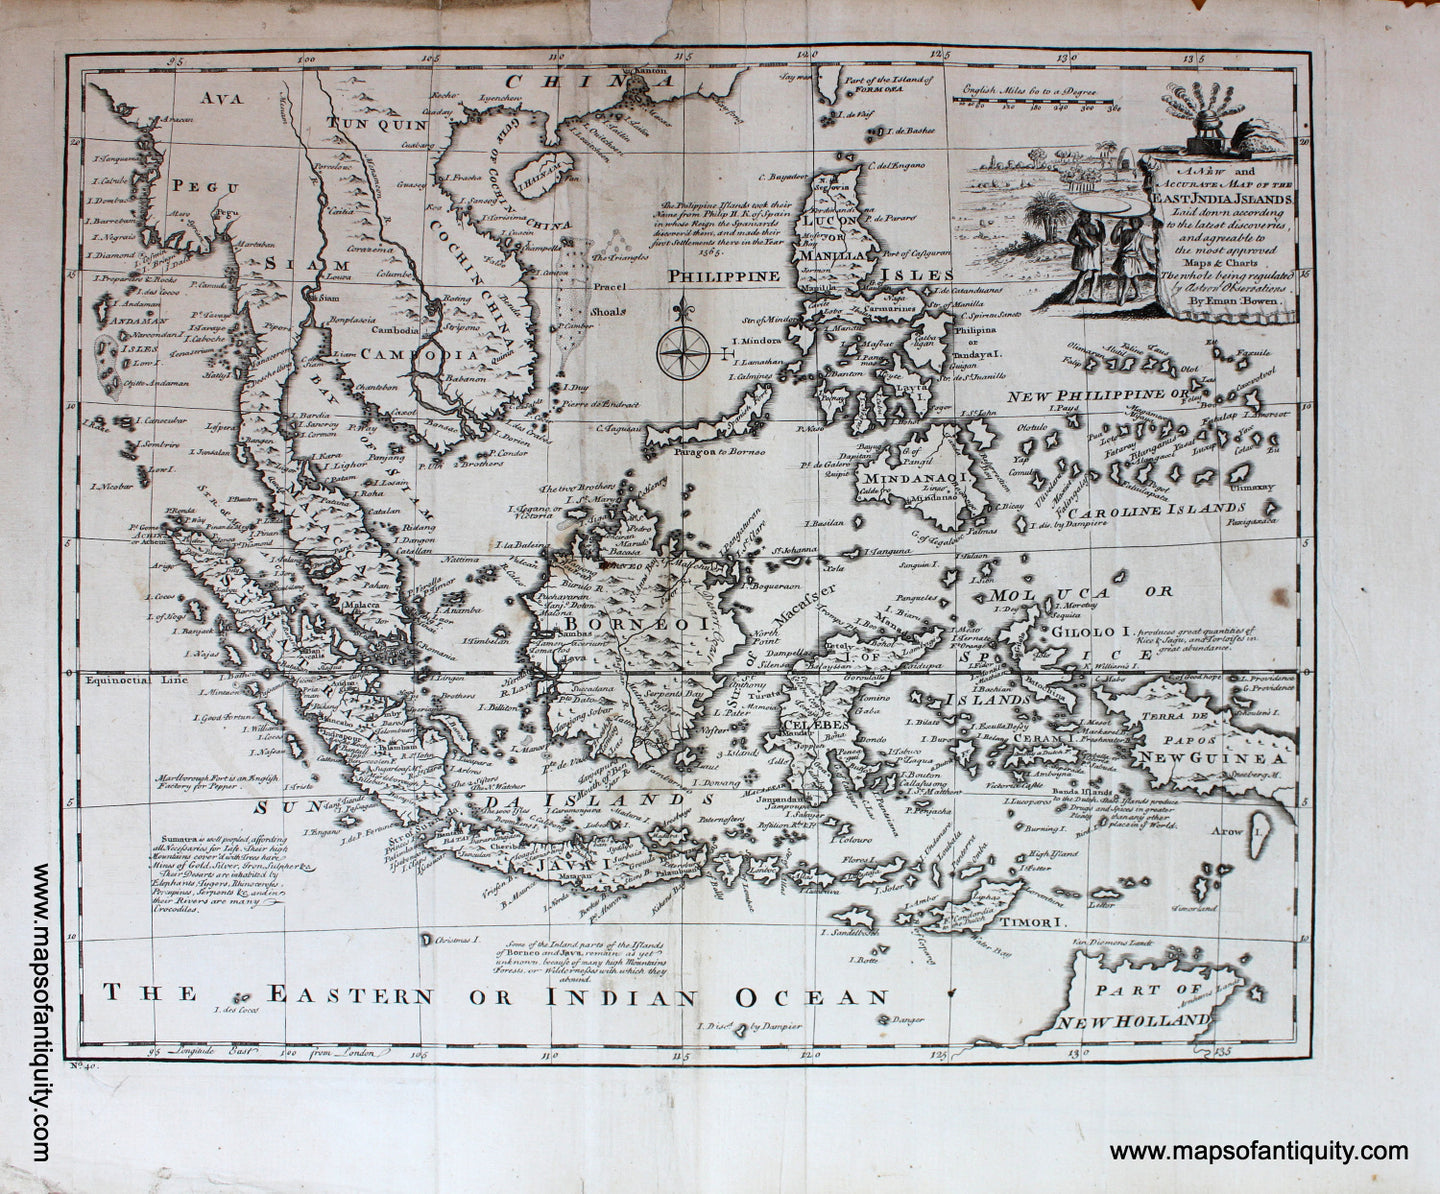 Antique-Black-and-White-Map-A-New-and-Accurate-Map-of-the-East-India-Islands-laid-down-according-to-the-latest-discoveries-and-agreeable-to-the-most-approved-Maps-&-Charts-The-whole-being-regulated-by-Astronomical-Observations-**********-Asia-Southeast-Asia-and-Indonesia-c.-1747-Bowen-Maps-Of-Antiquity